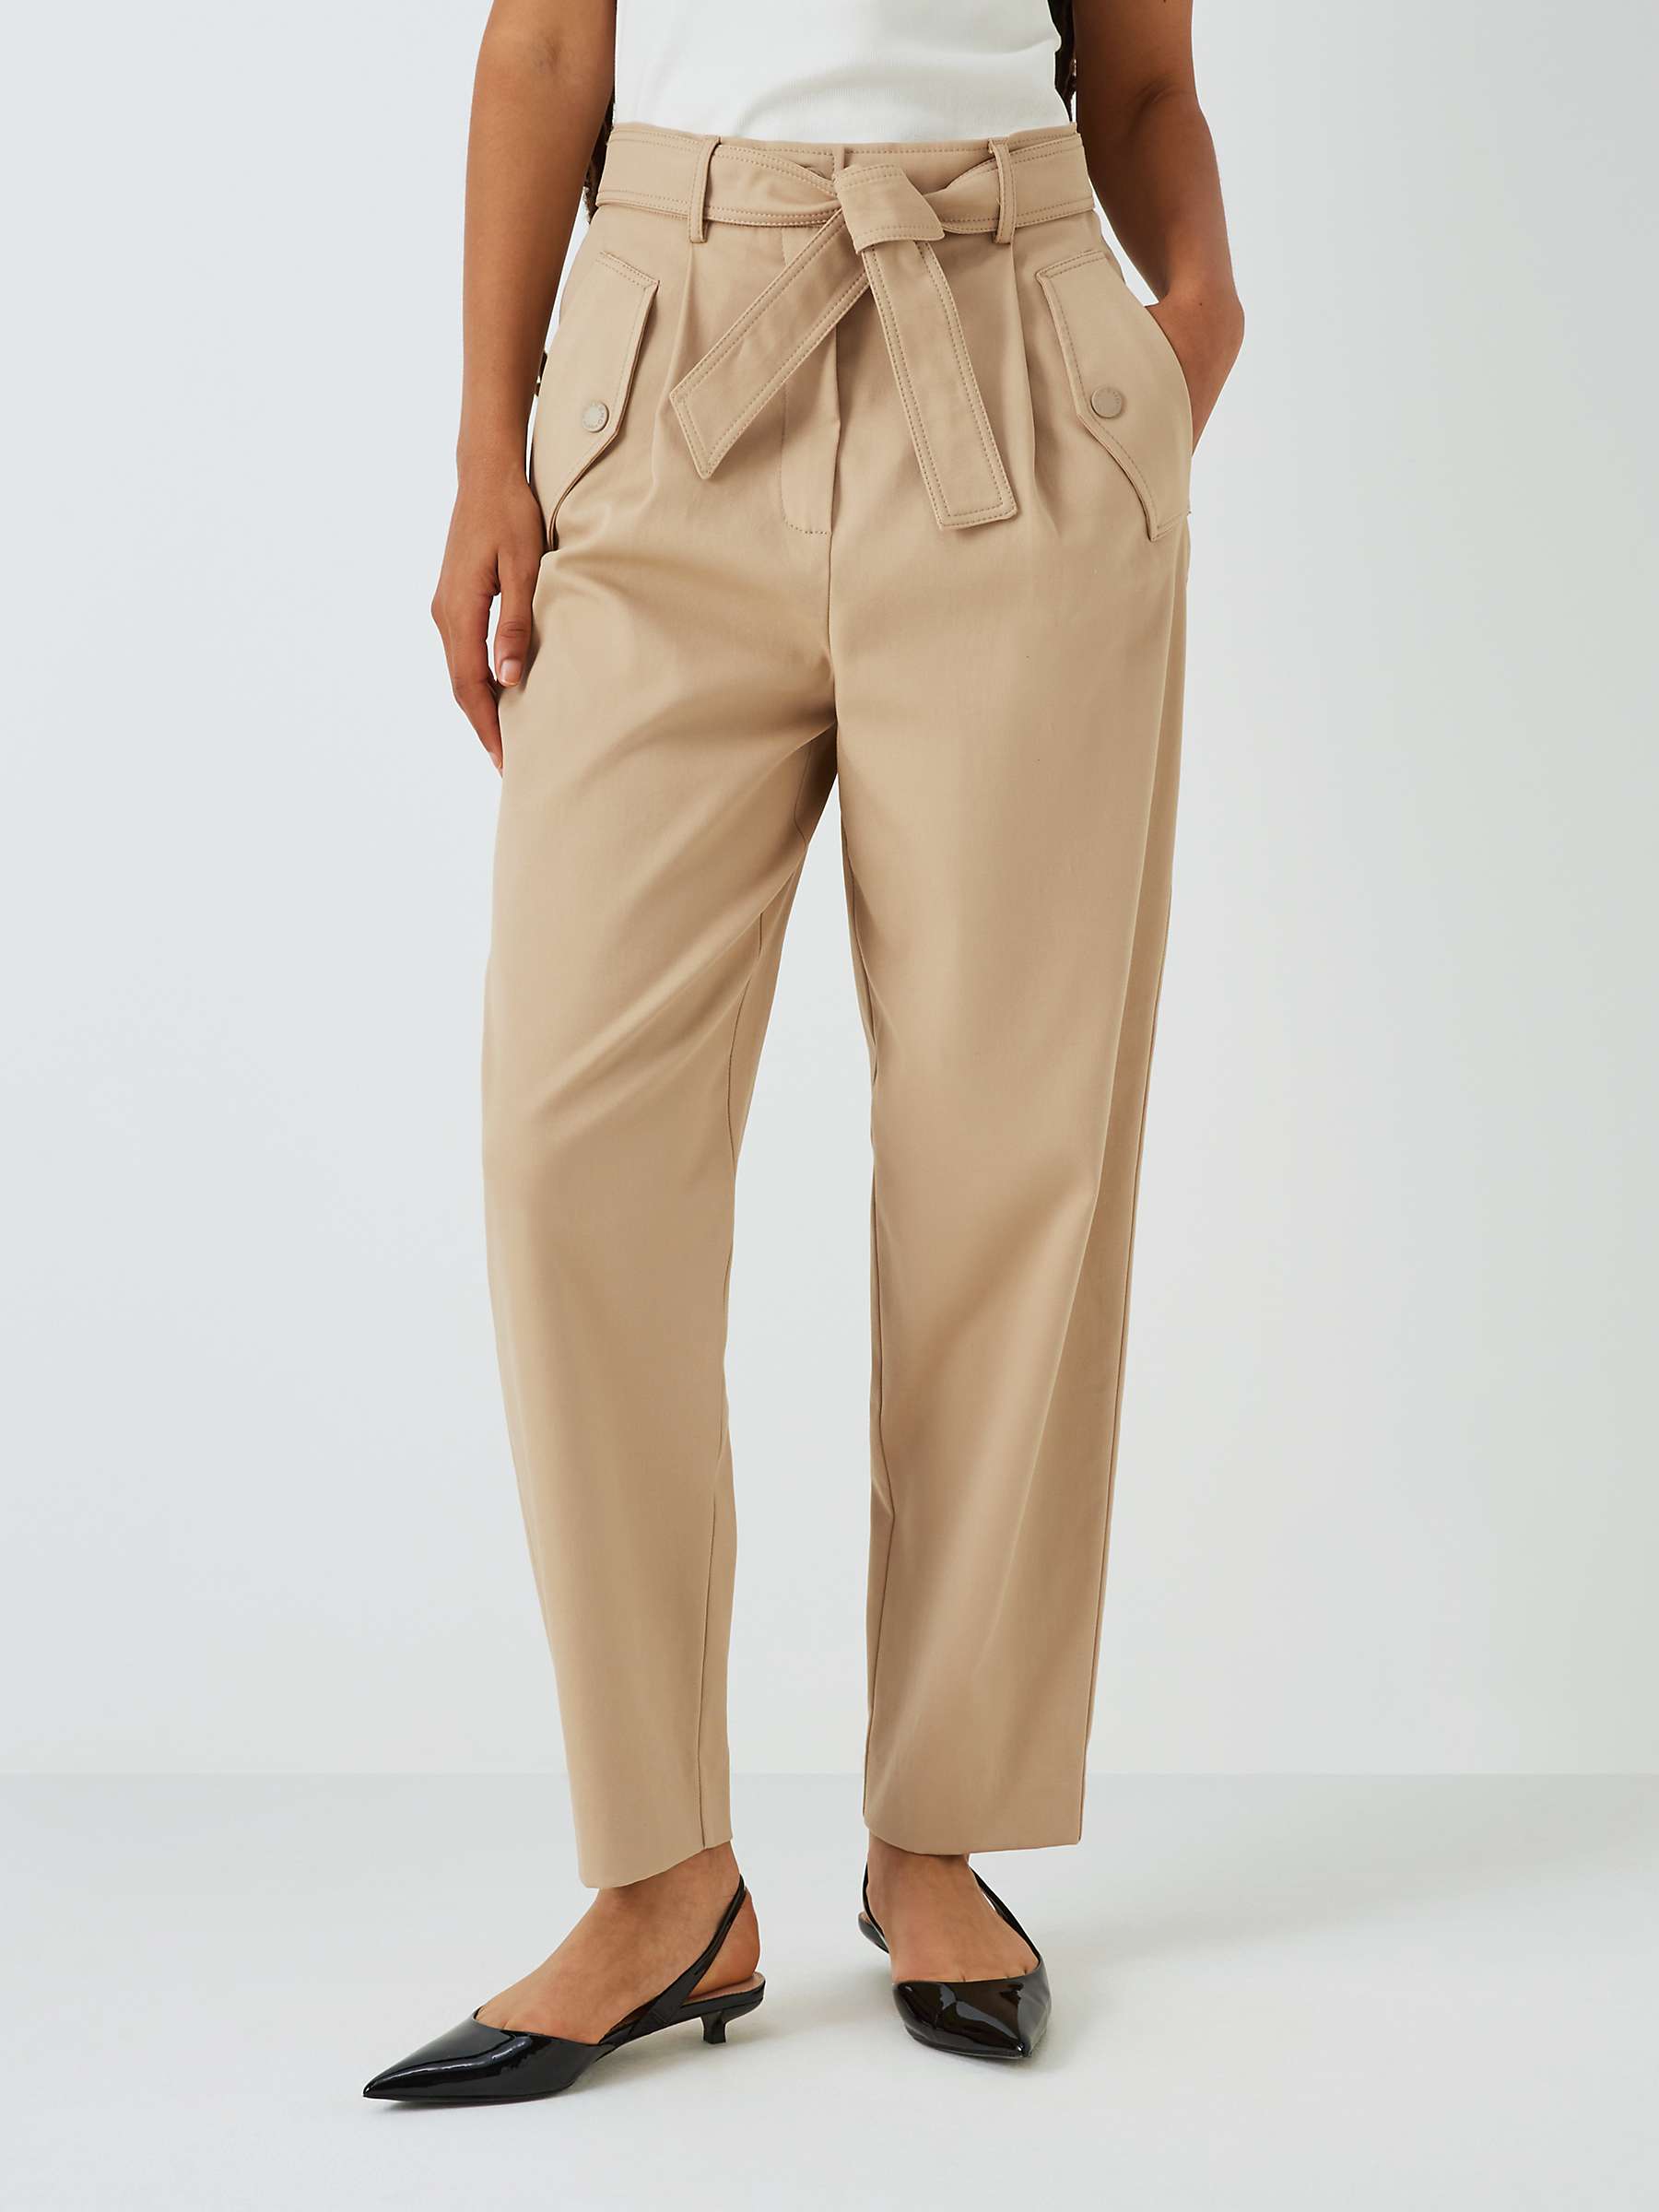 Buy Weekend MaxMara Occ High Rise Belted Trousers, Sand Online at johnlewis.com